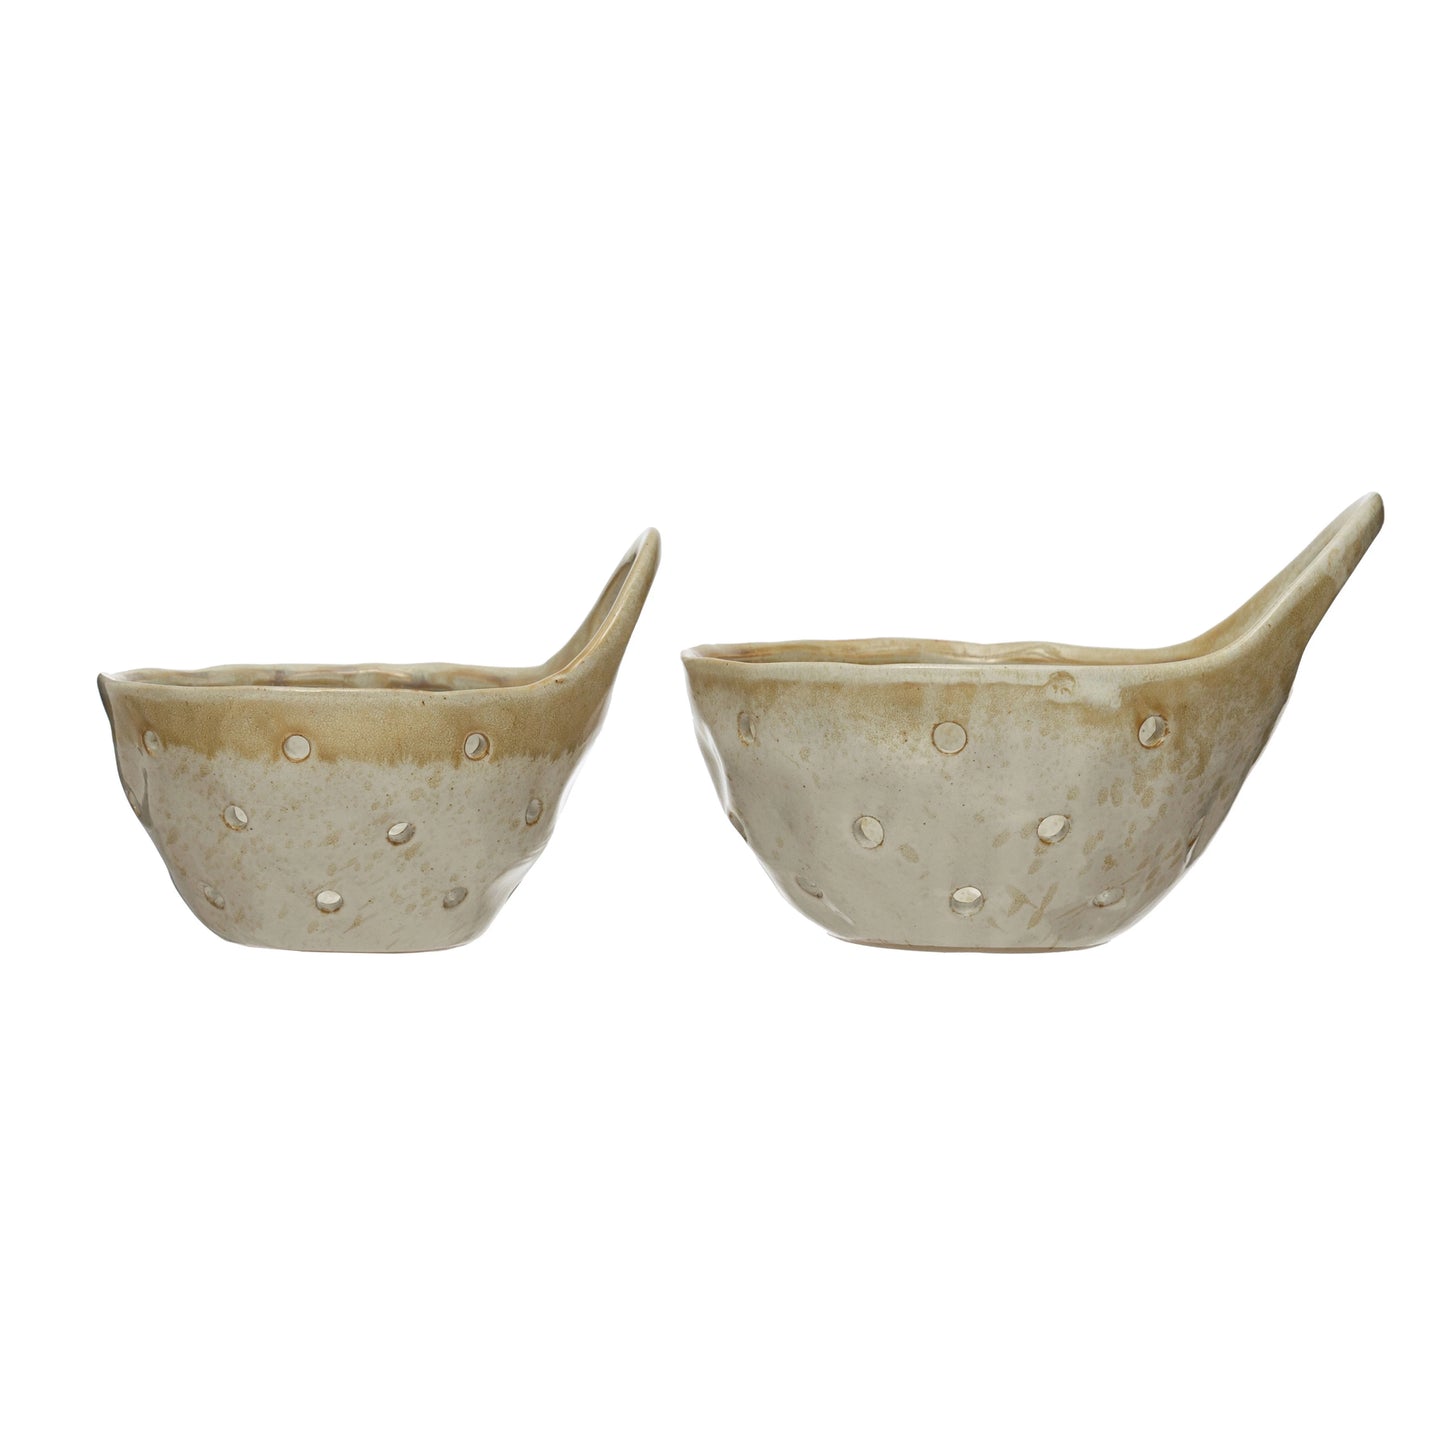 side view of the small and large stoneware colanders with handles on a white background